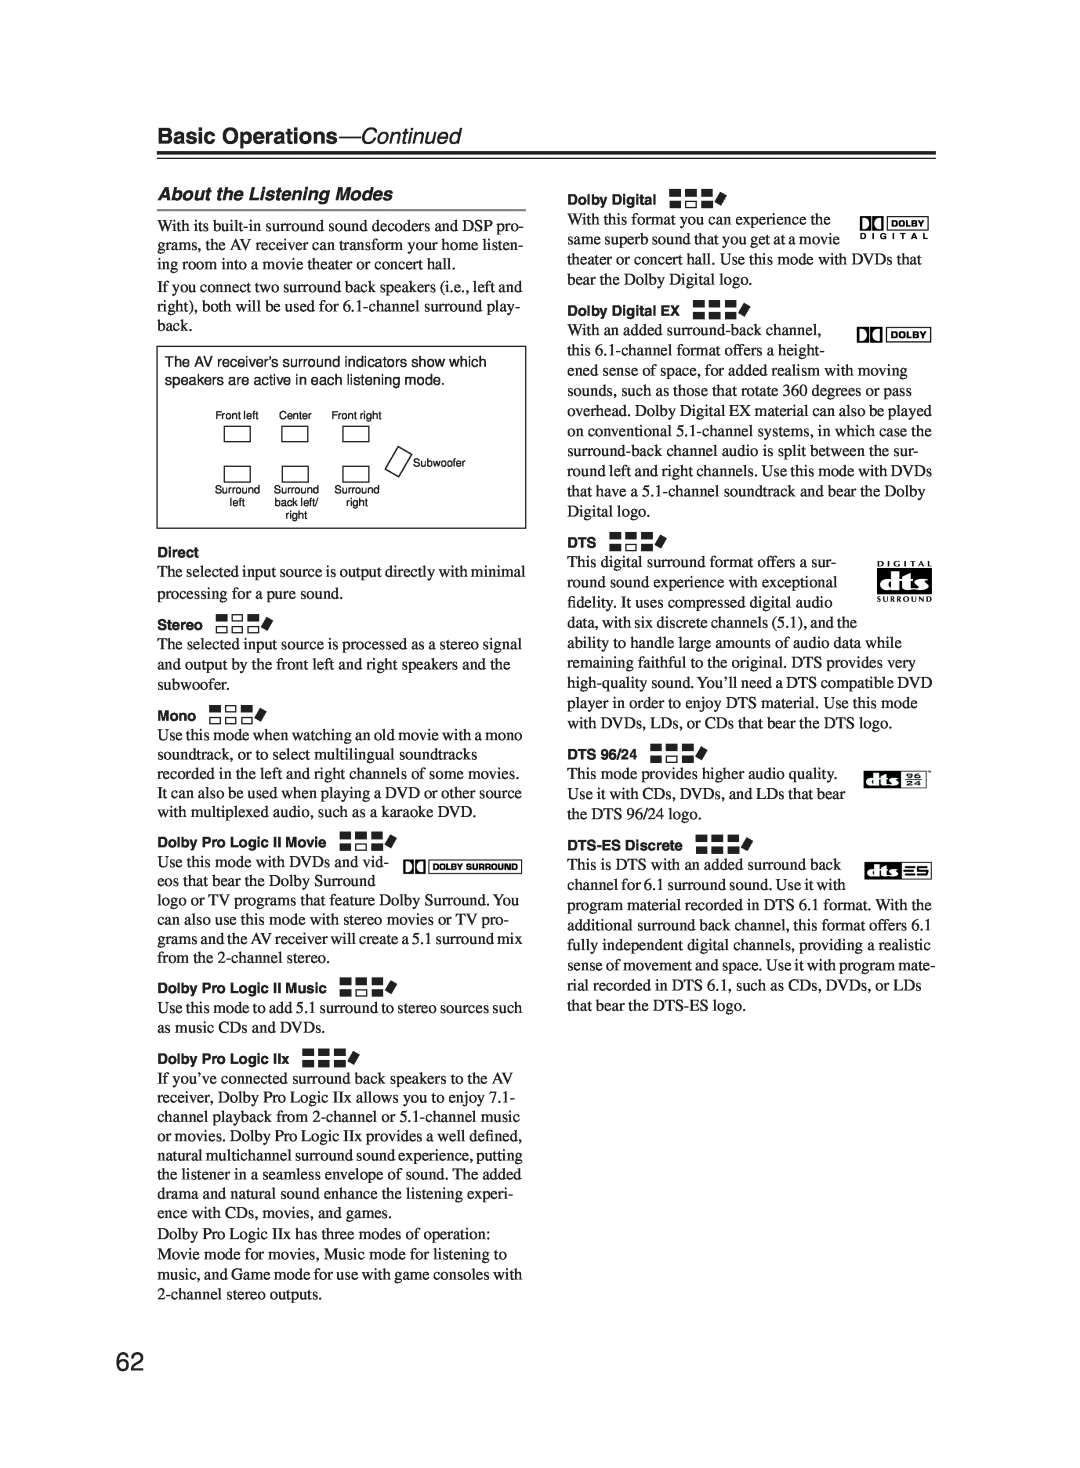 Onkyo TX-SR603X instruction manual About the Listening Modes, Basic Operations—Continued 